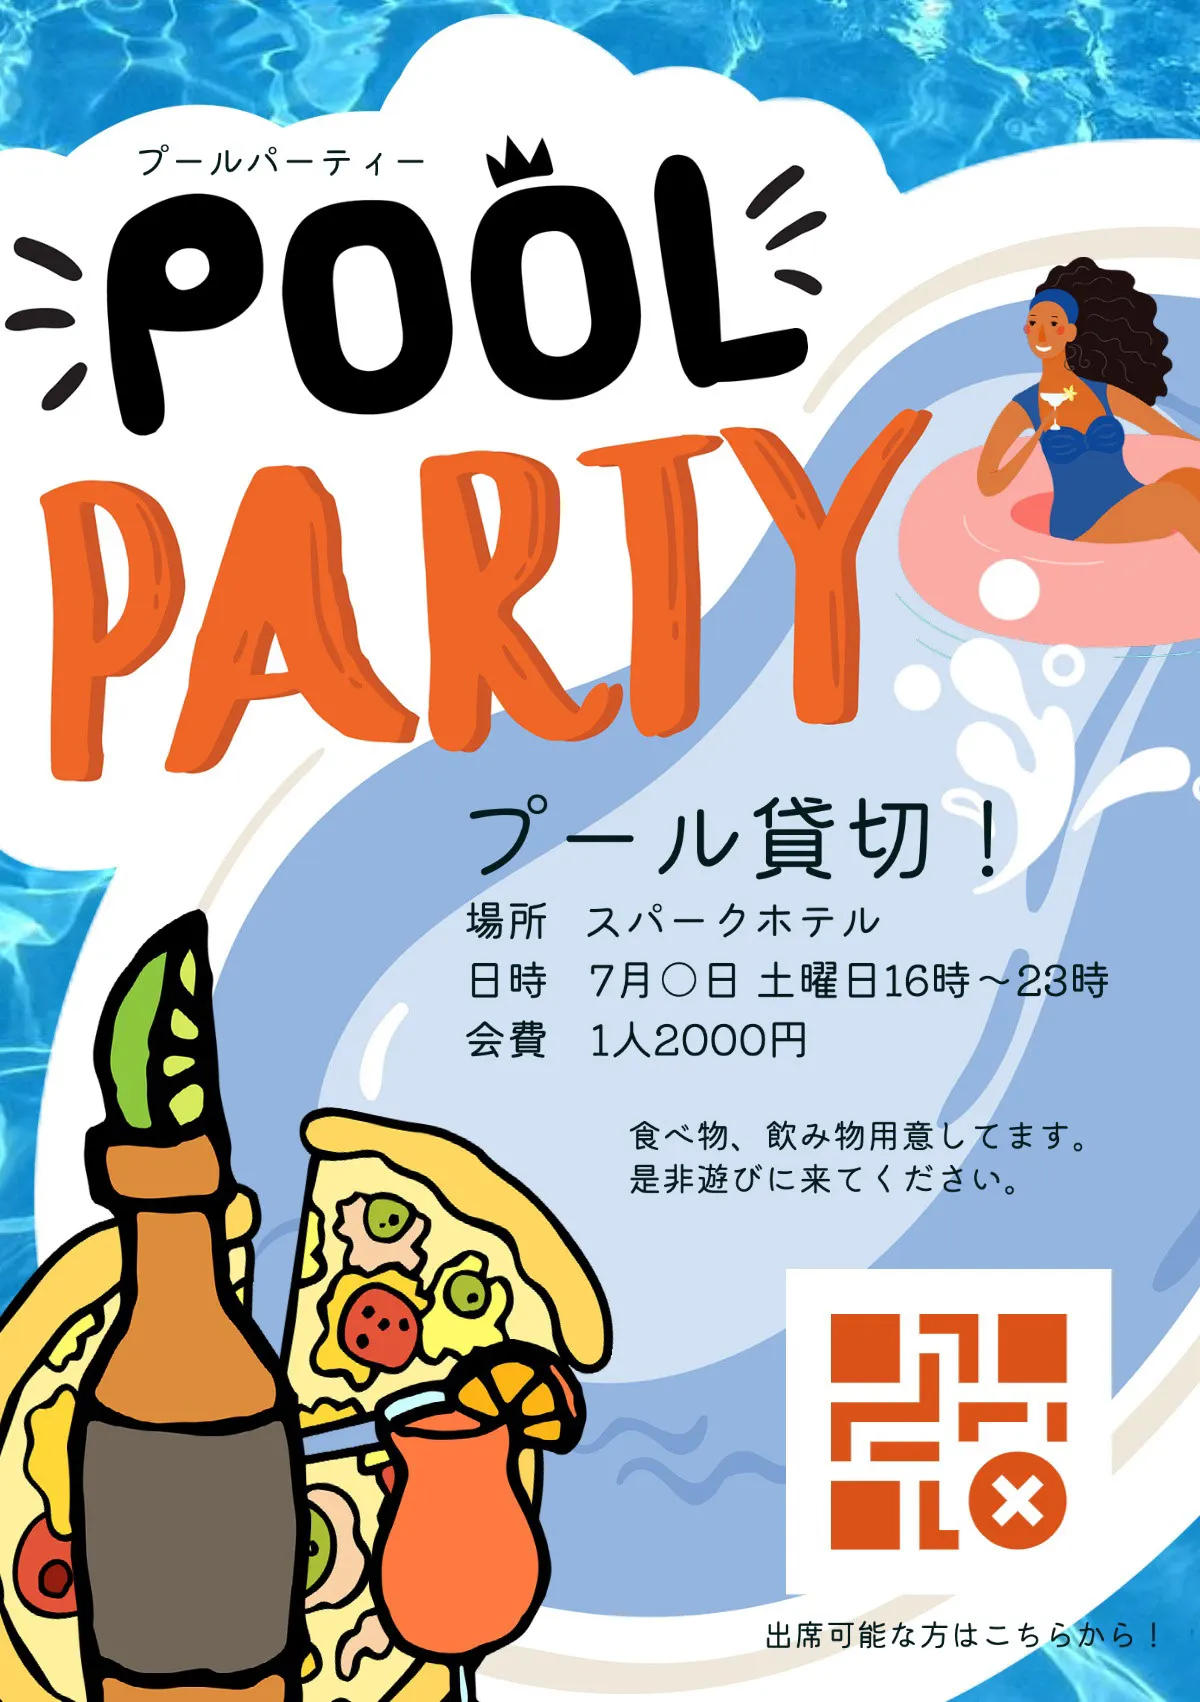 Pool and drink party Party invitation